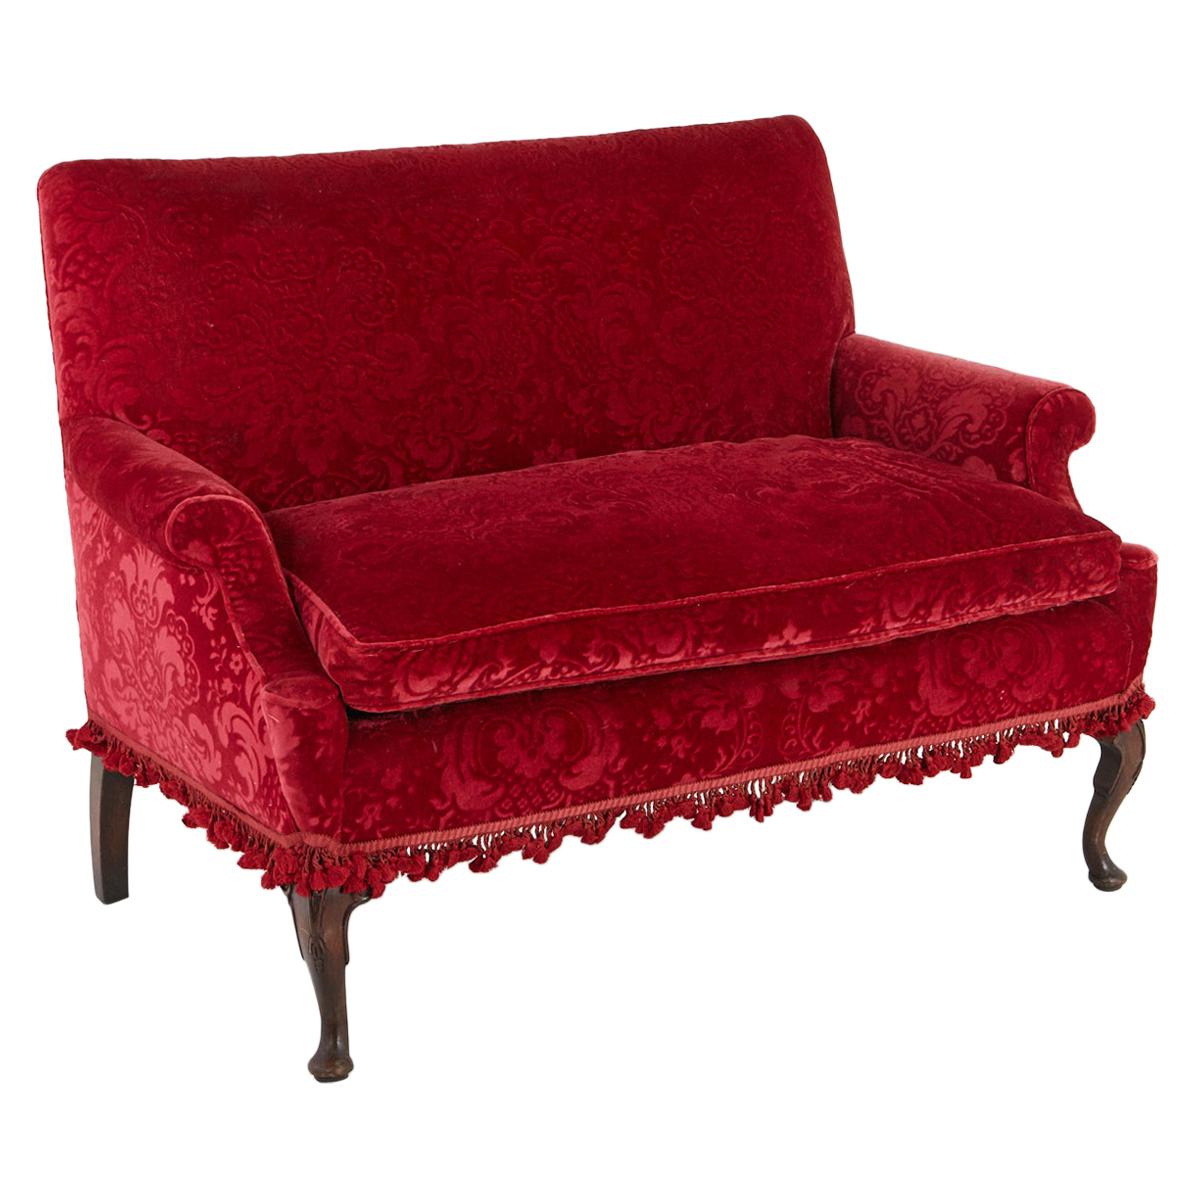 Victorian Sofa in Red Embossed Acanthus Mohair Upholstery No 1 of 2